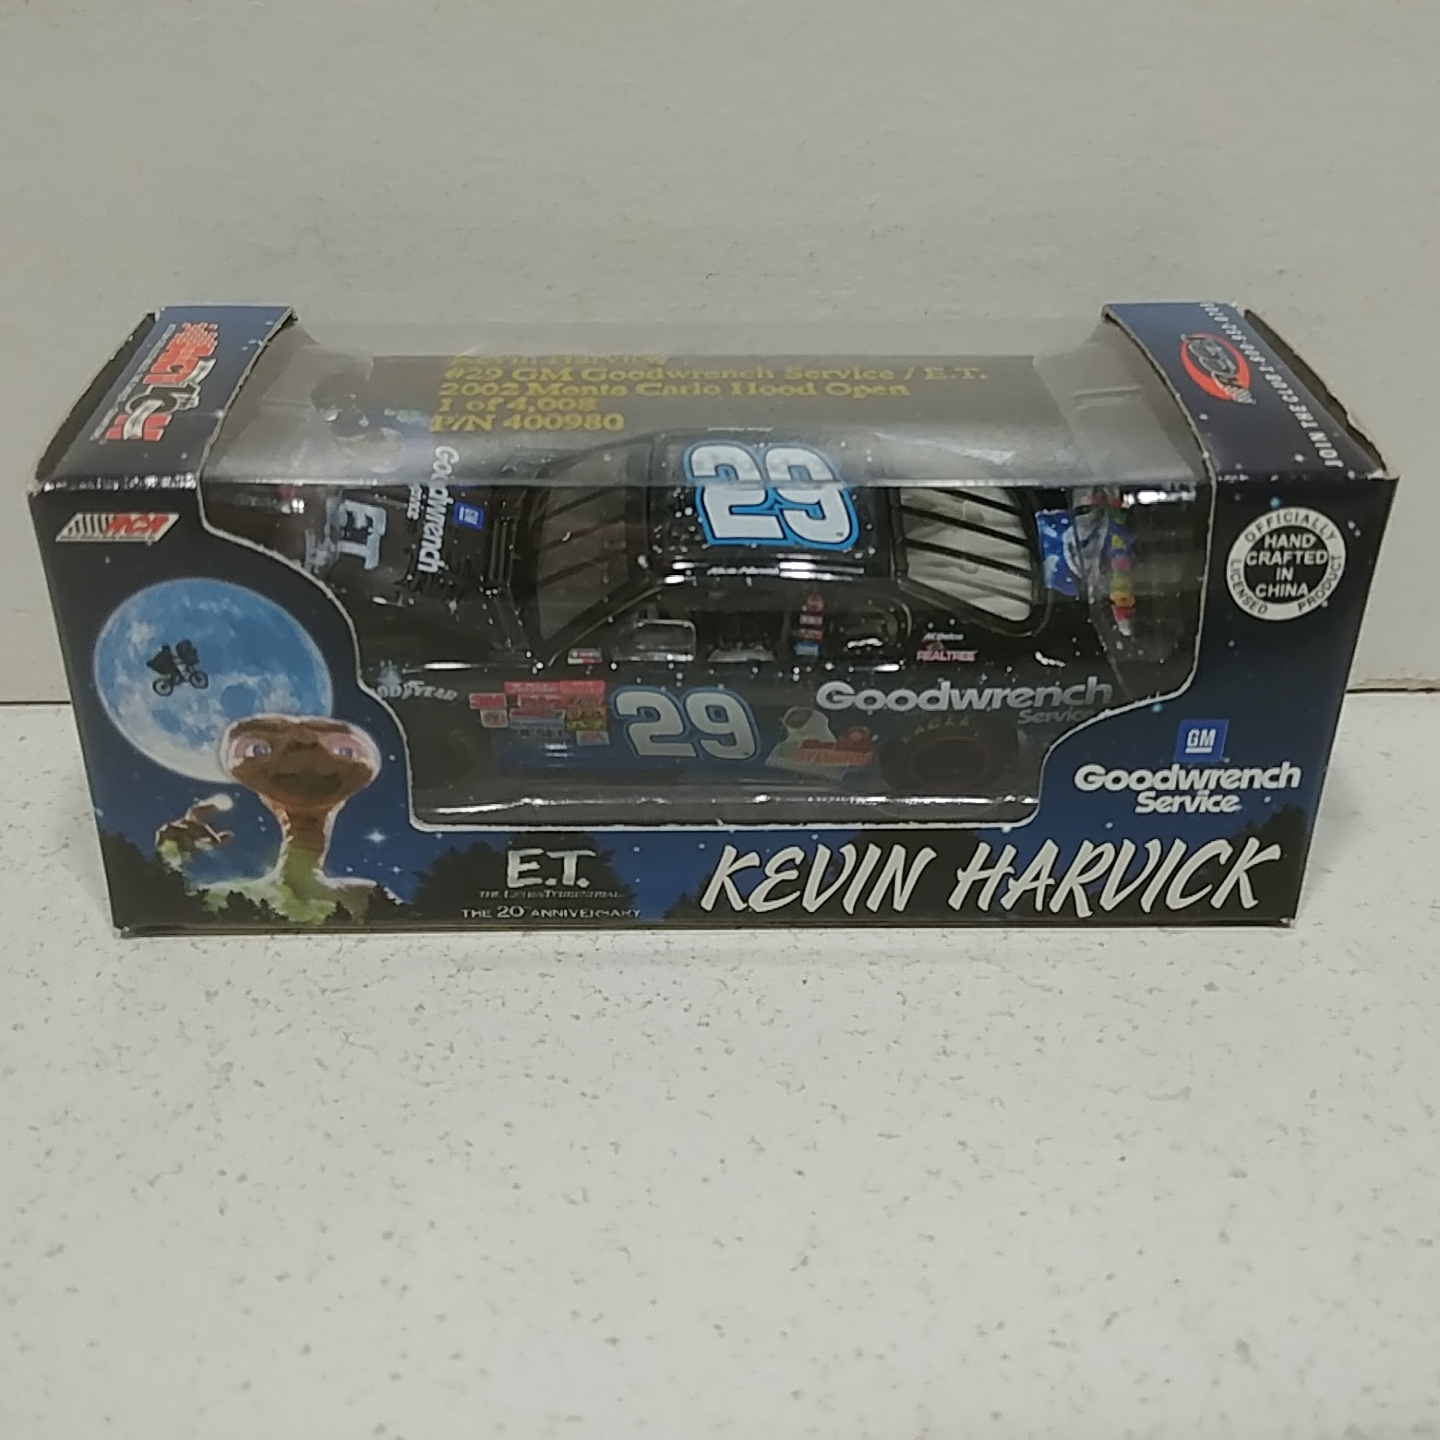 2002 Kevin Harvick 1/64th Goodwrench "E.T." RCCA hood open Monte Carlo